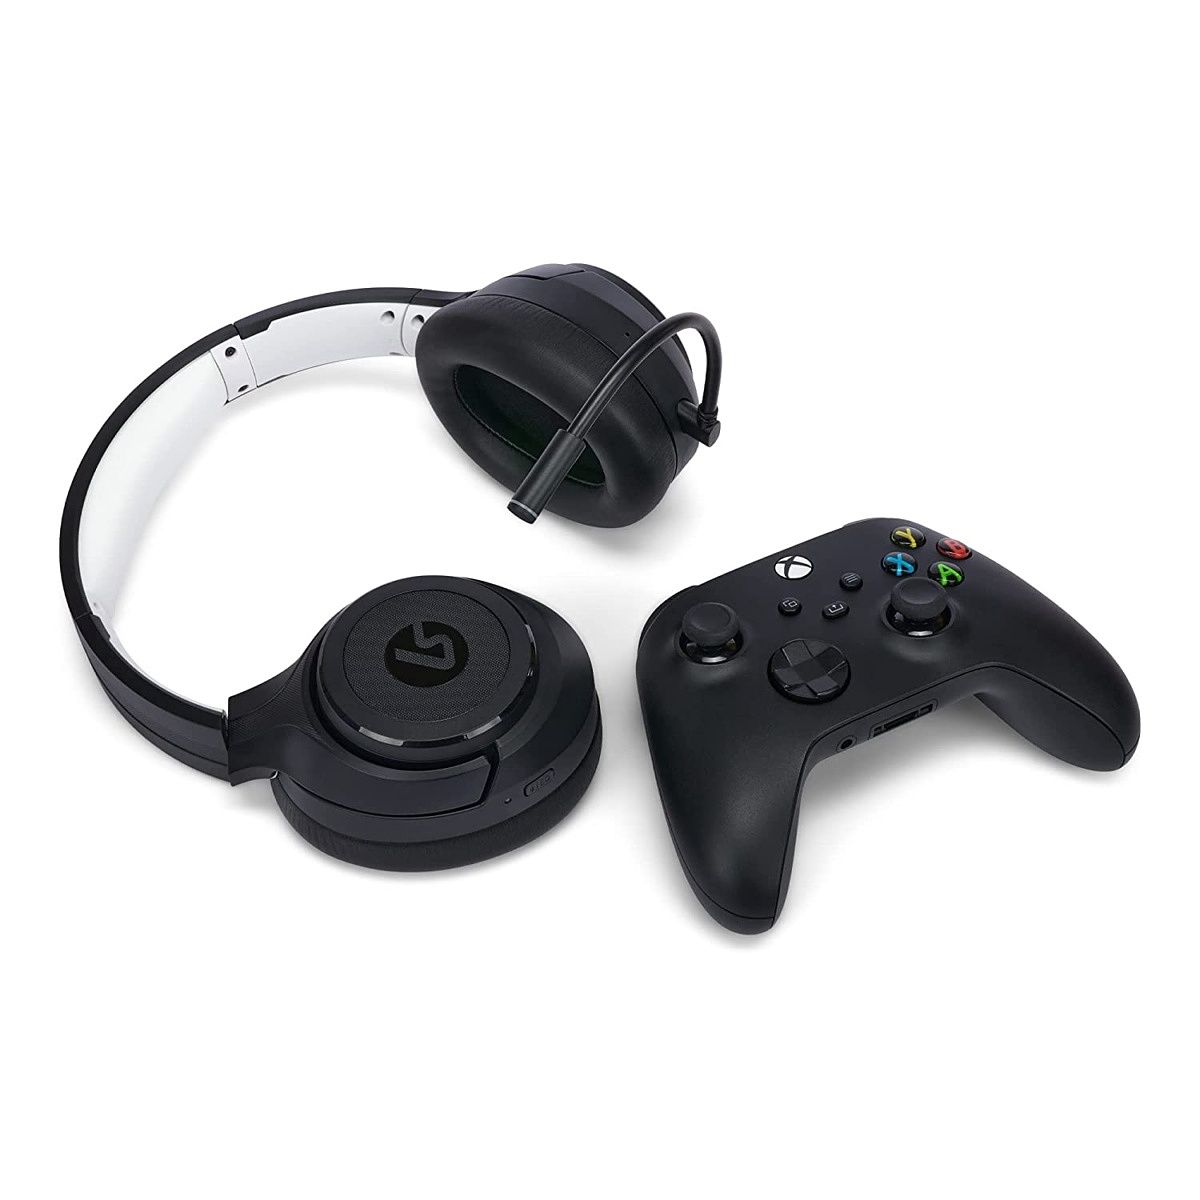 LucidSound's new LS100X Xbox headset can last 130 hours on a charge